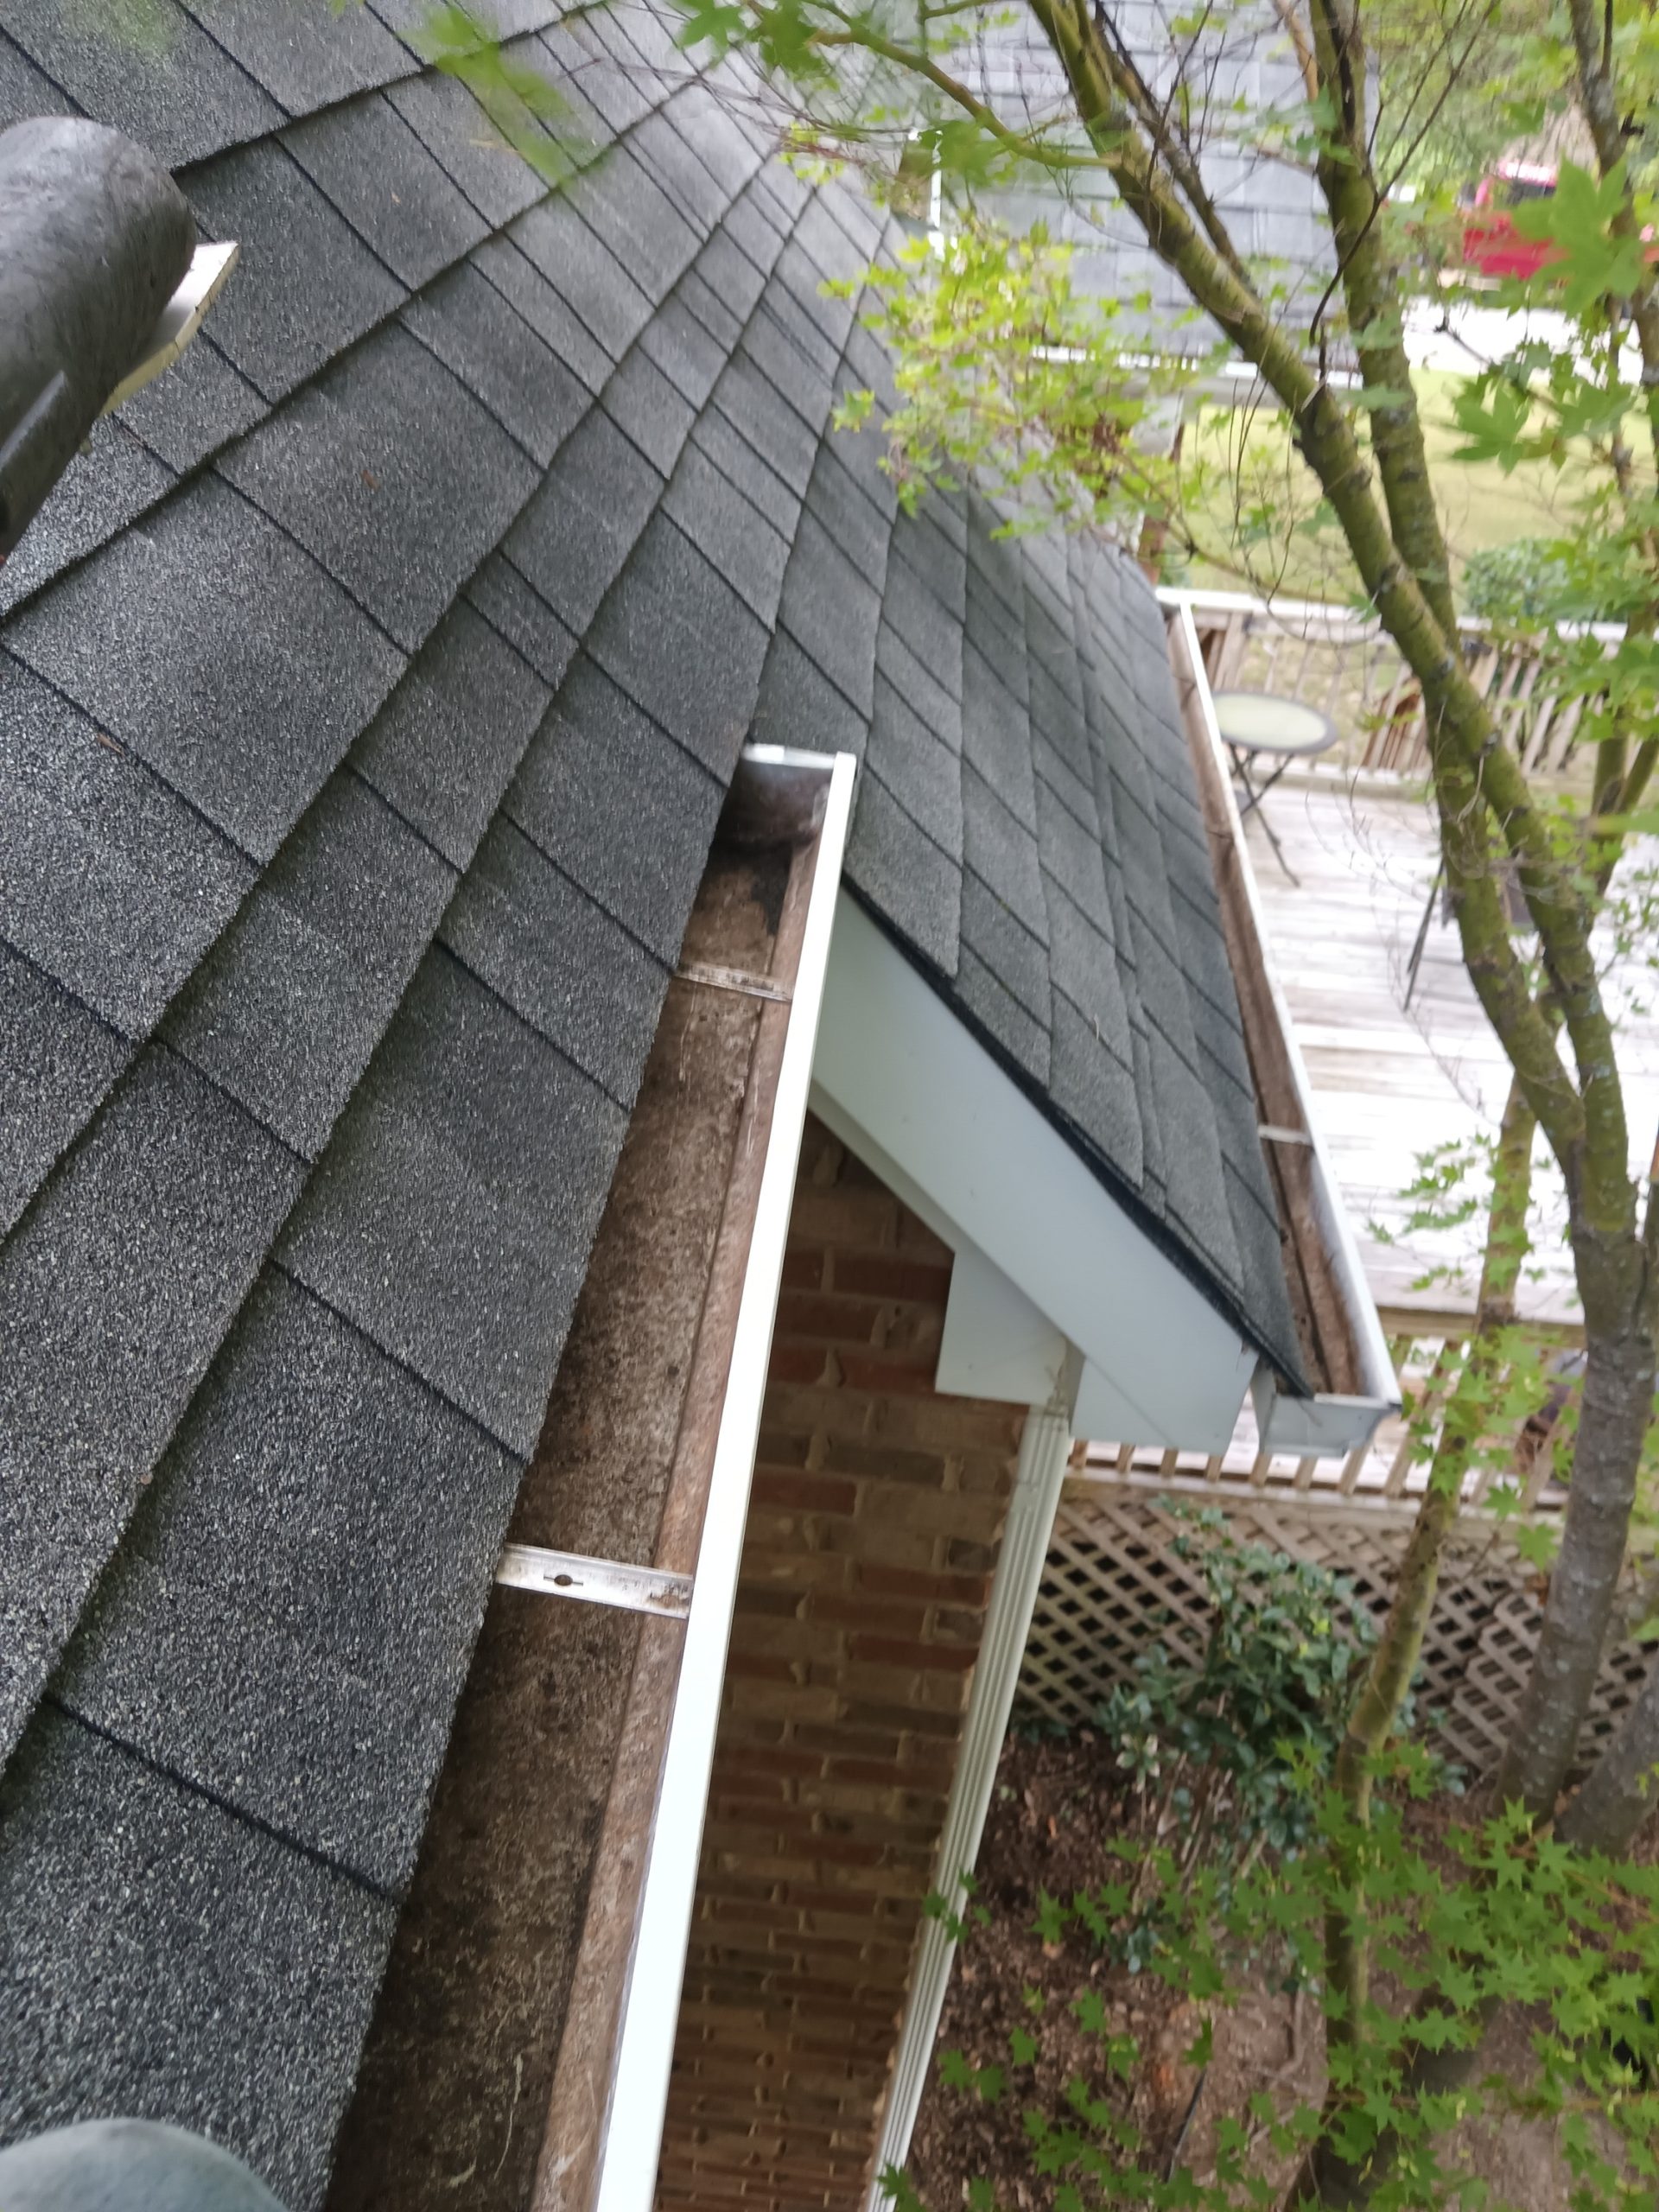 Gutter Cleaning in Boston for Adrian Home